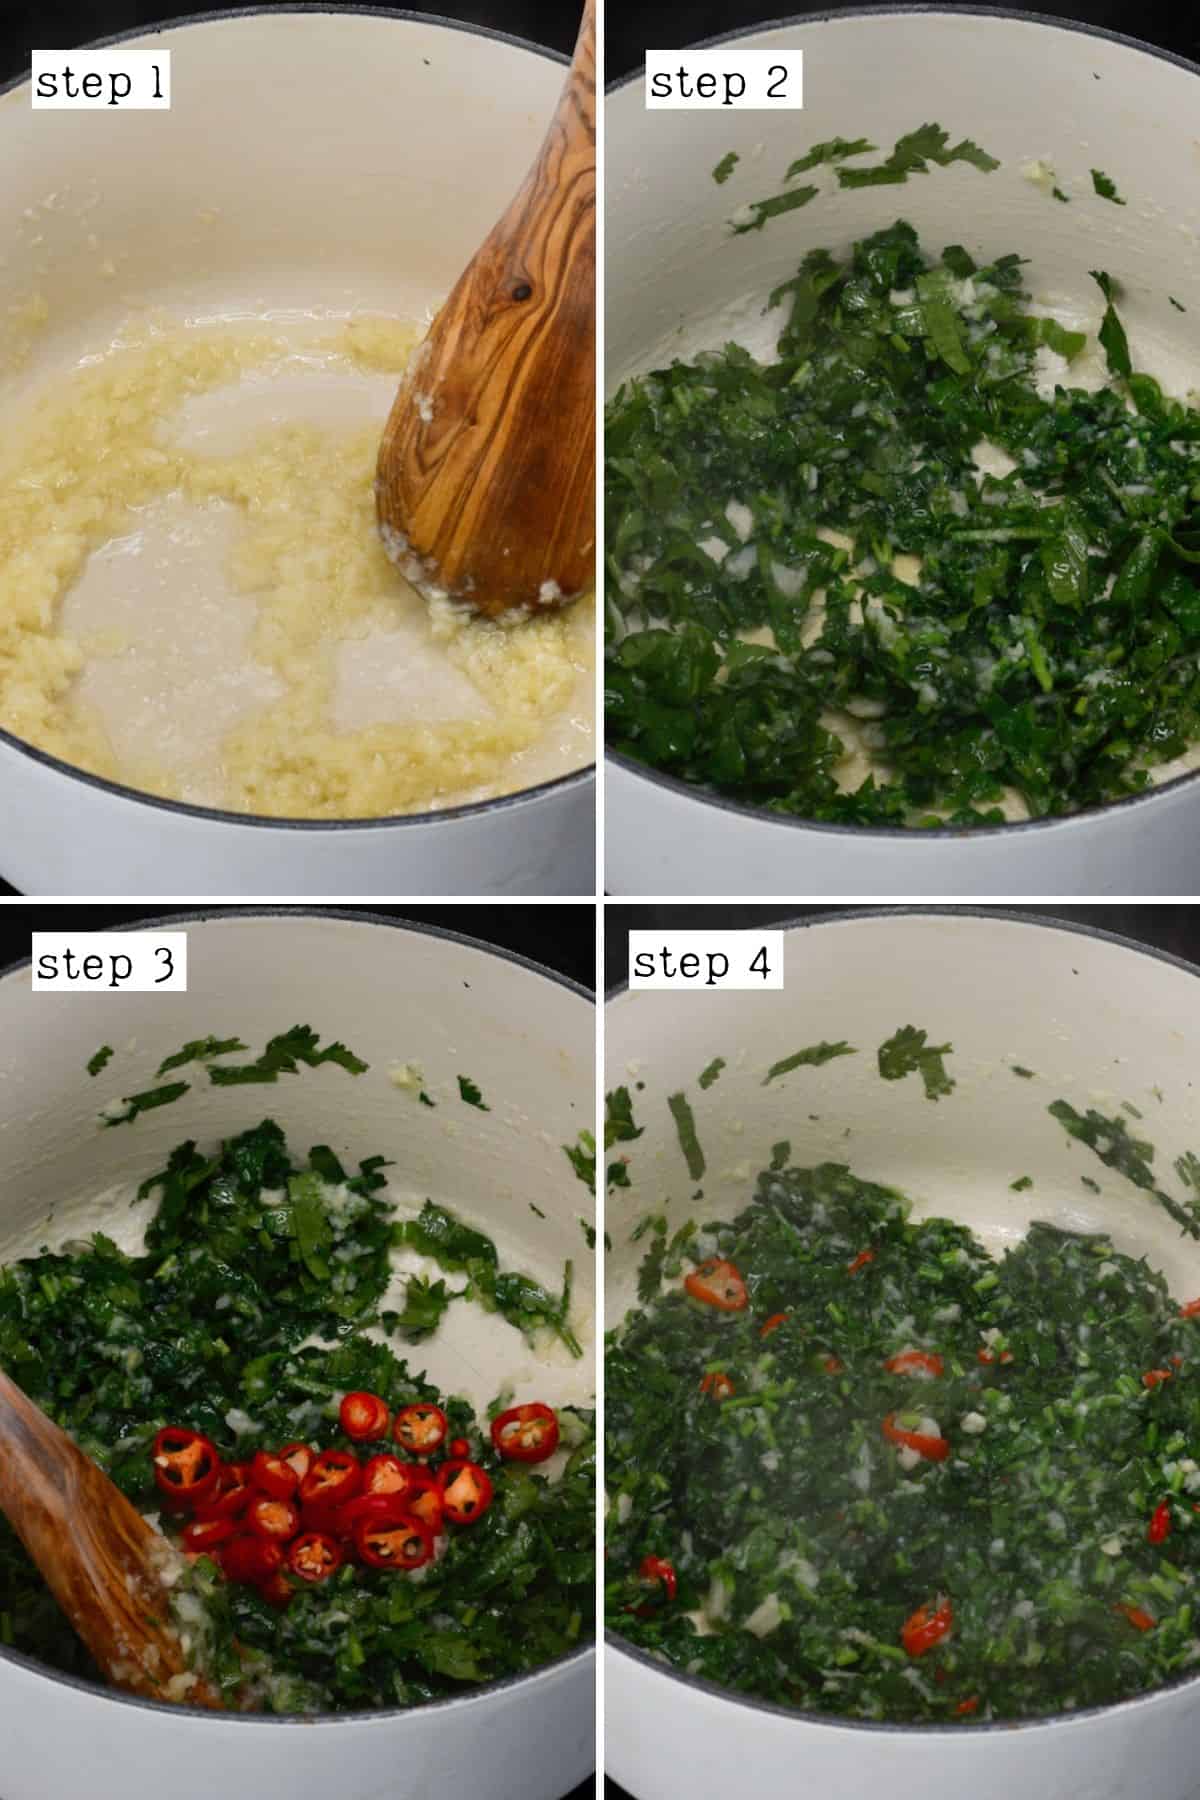 Steps for cooking garlic and cilantro